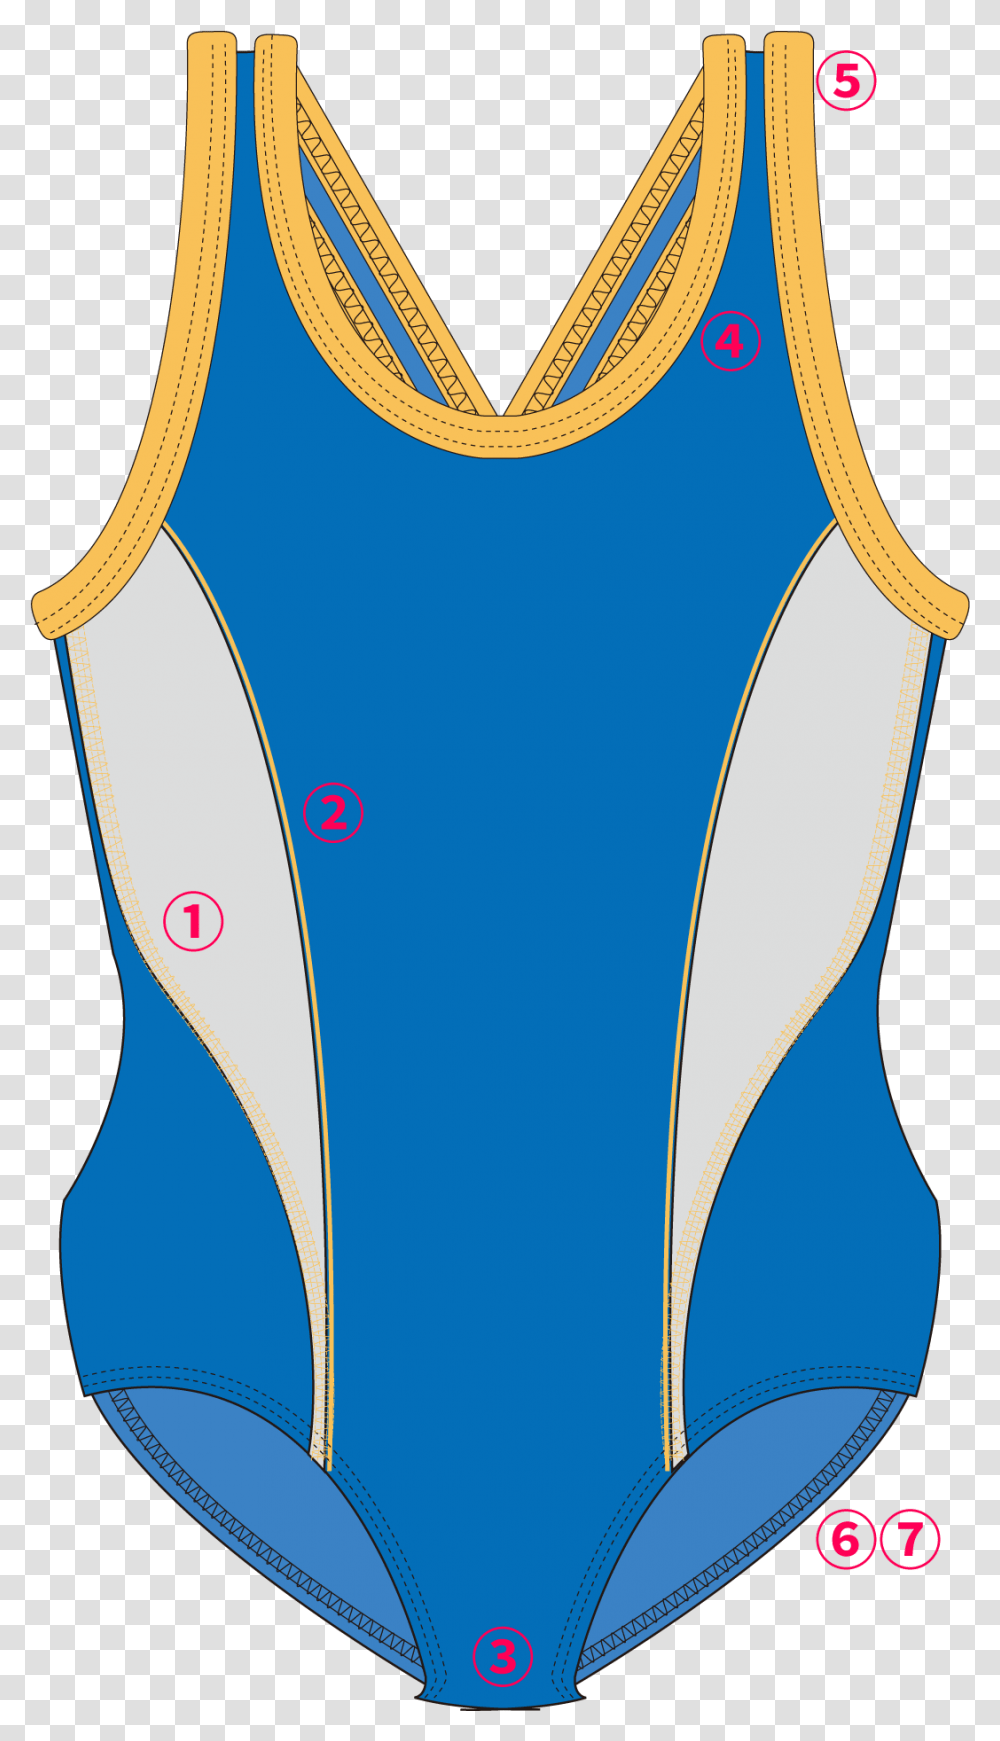 Wear Find Product By Maillot, Apparel, Armor, Undershirt Transparent Png